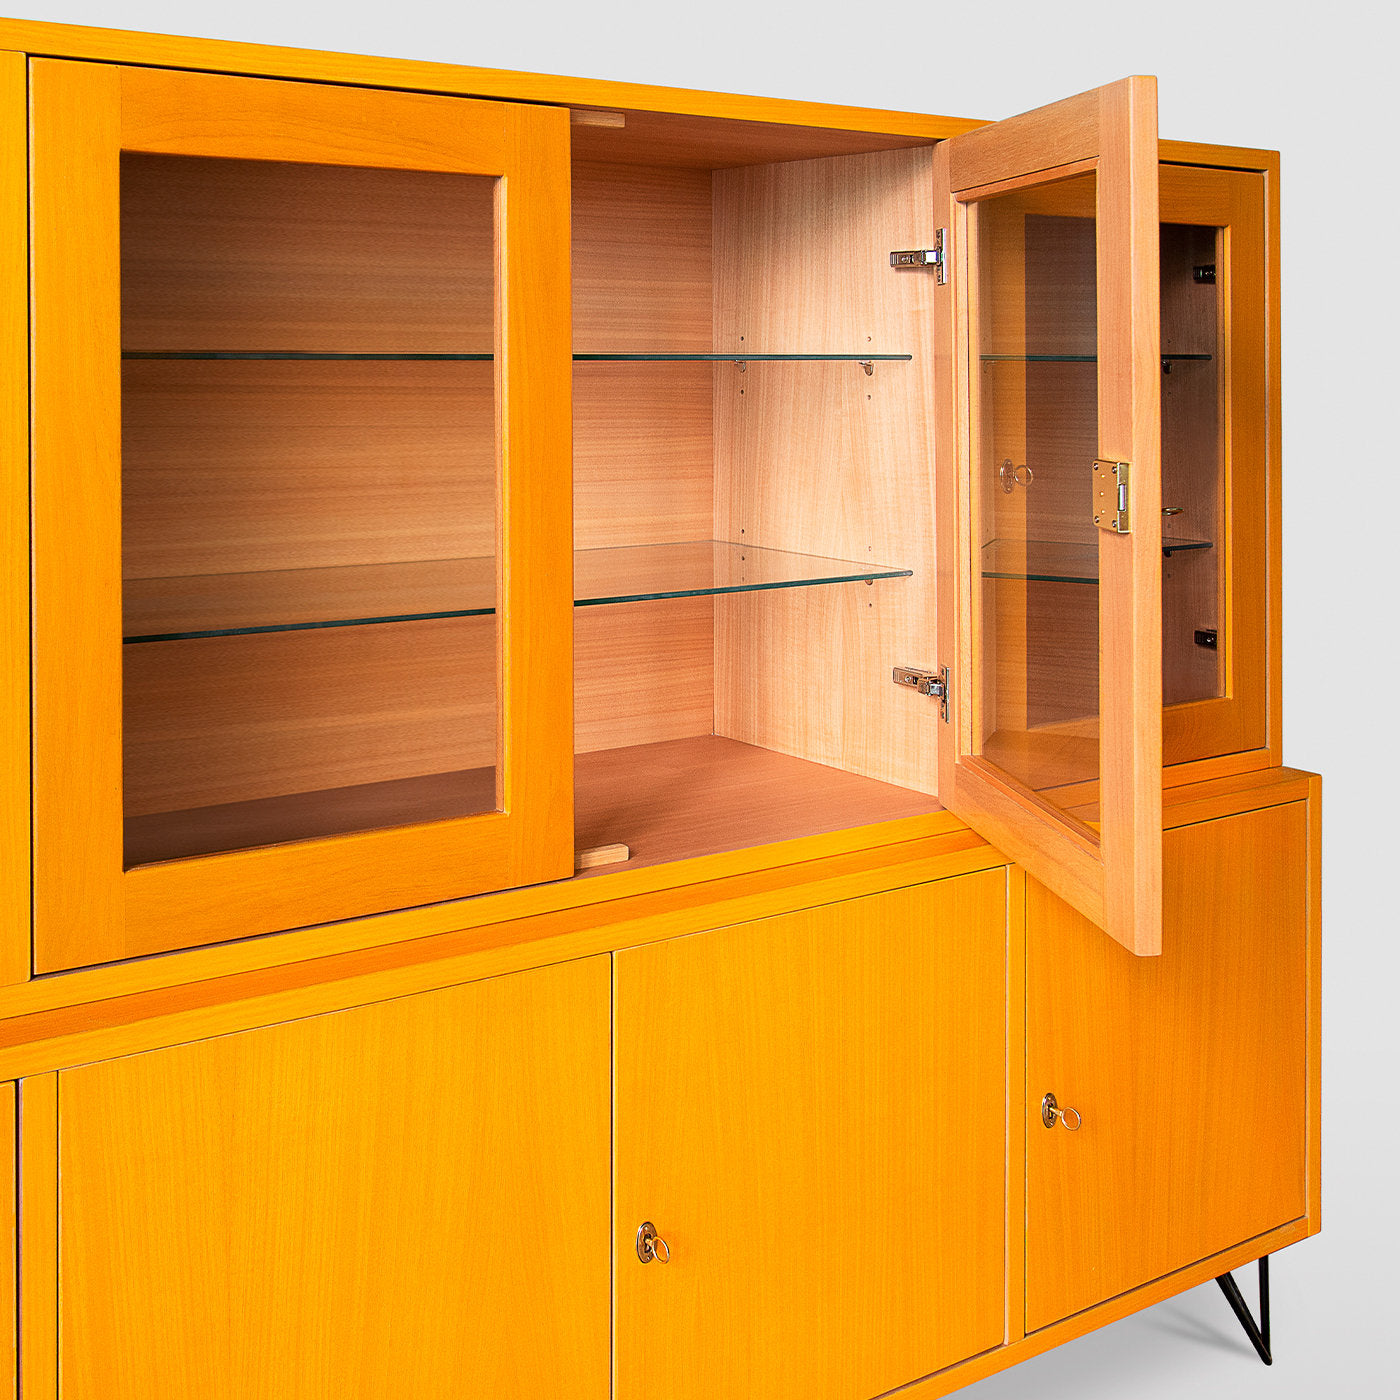 50s-style Yellow Cabinet - Alternative view 2